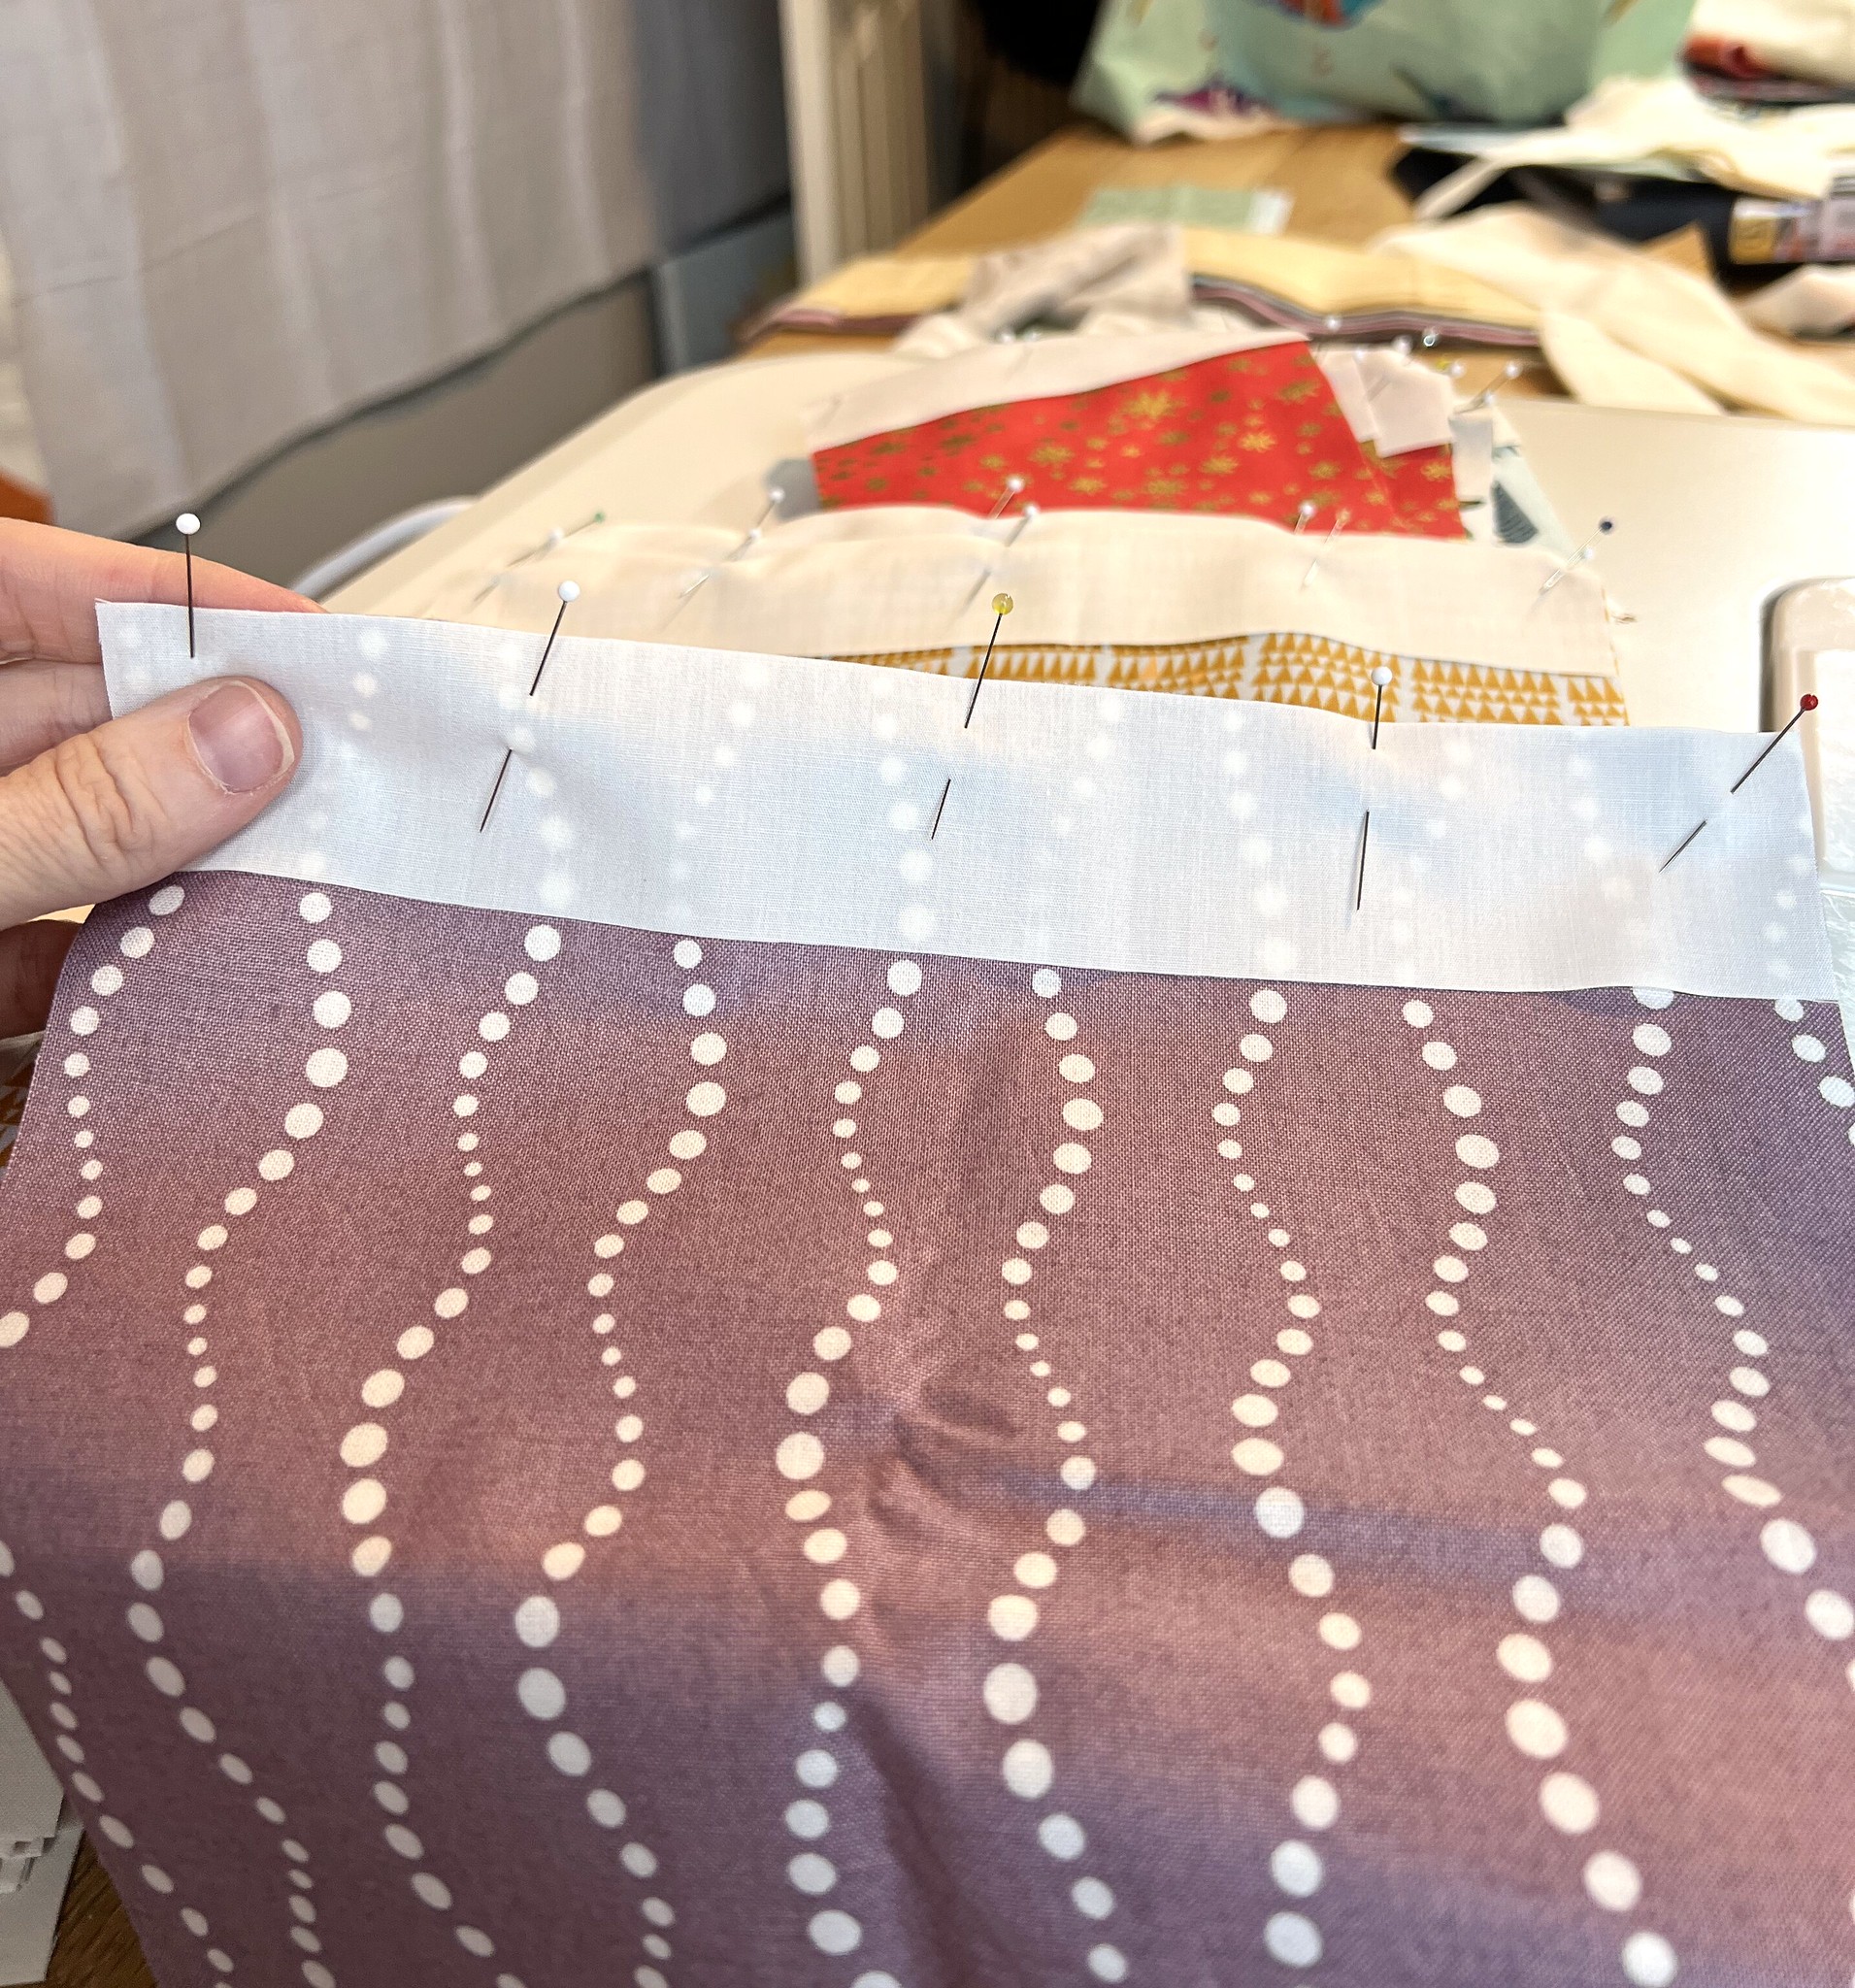 Pinning the Penny Quilt - Kitchen Table Quilting